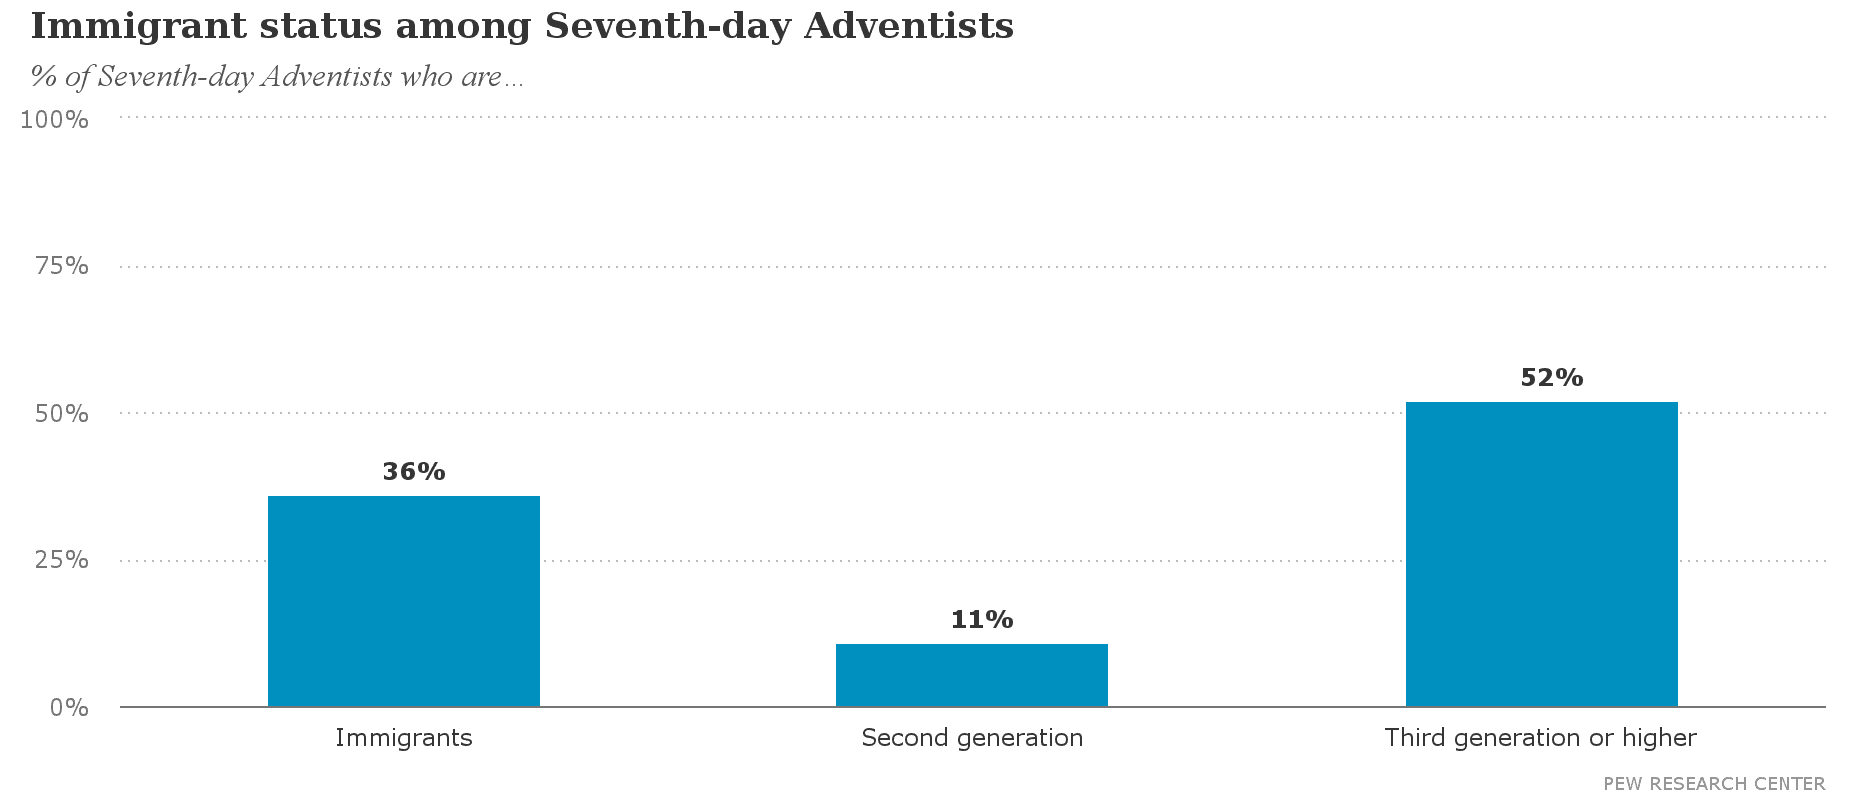 Immigrant status among Seventh day Adventists